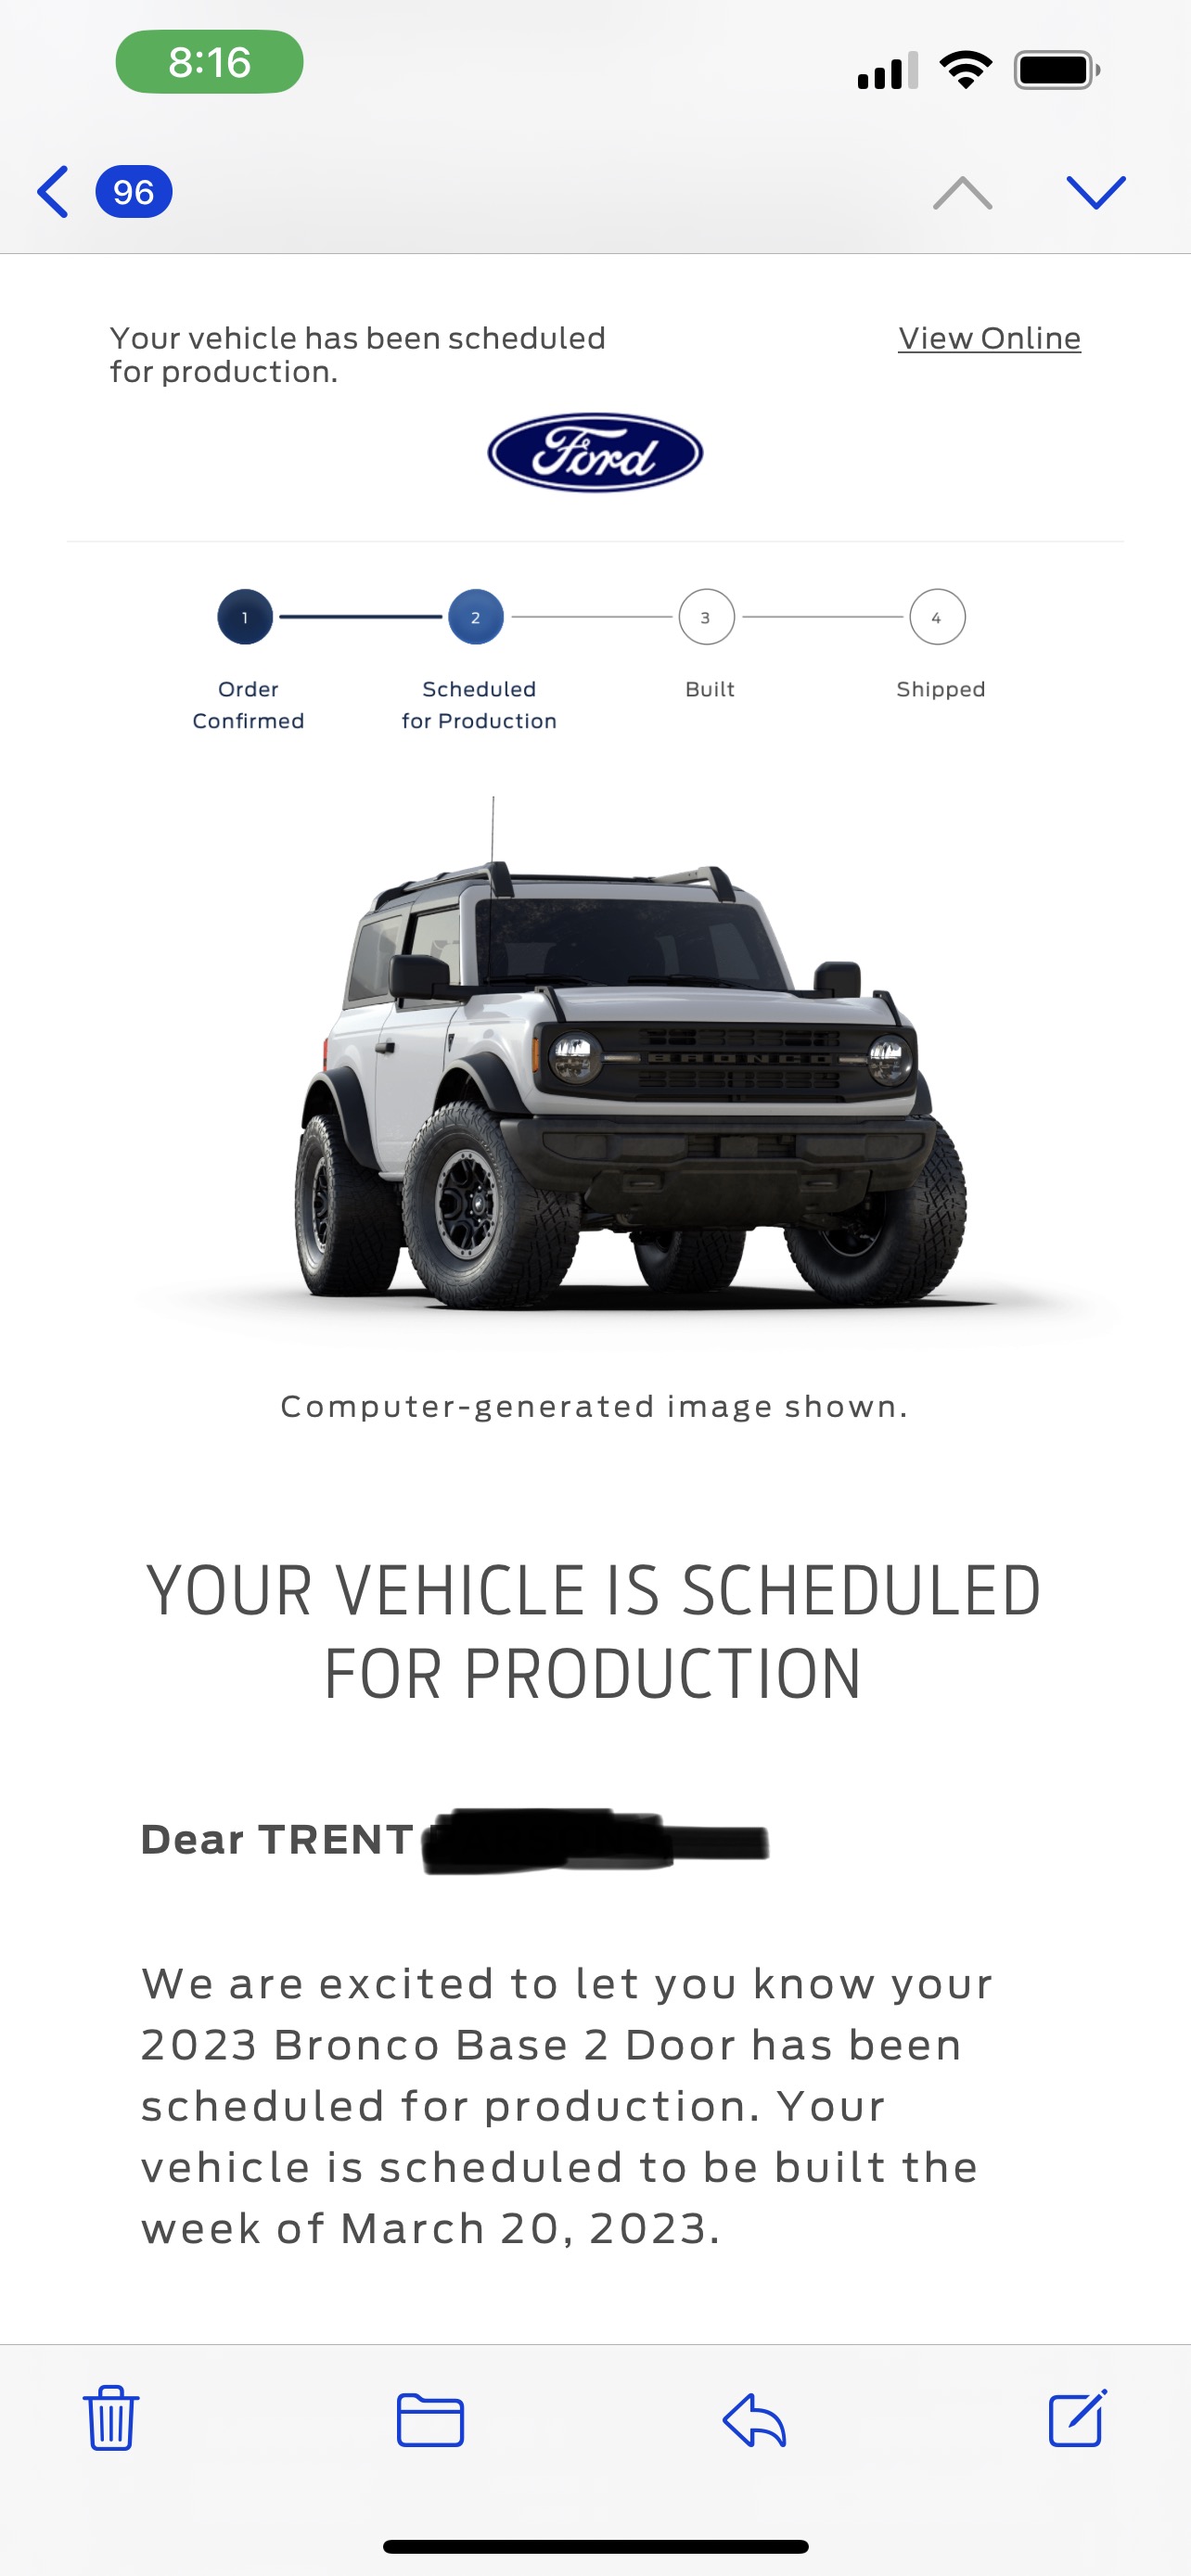 Ford Bronco 📬 Just got scheduled email today Jan 19! Post yours! BEBF6B6B-8D70-4D00-ABA9-68327EC0C7E0